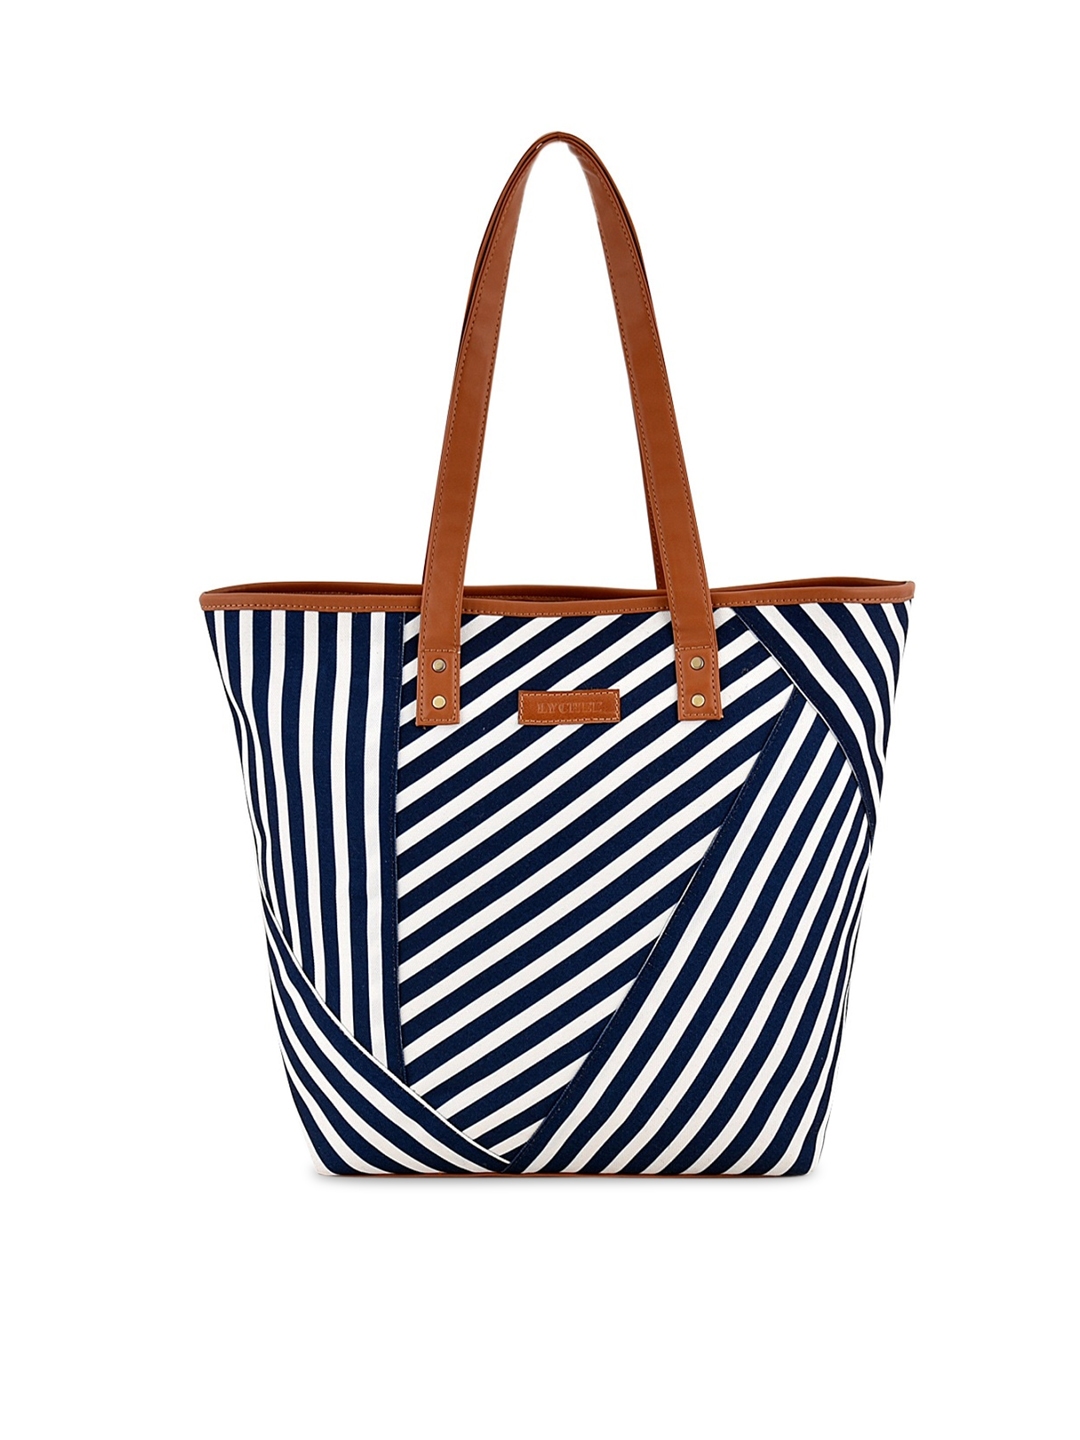 Lychee bags Navy Blue   White Striped Shoulder Bag